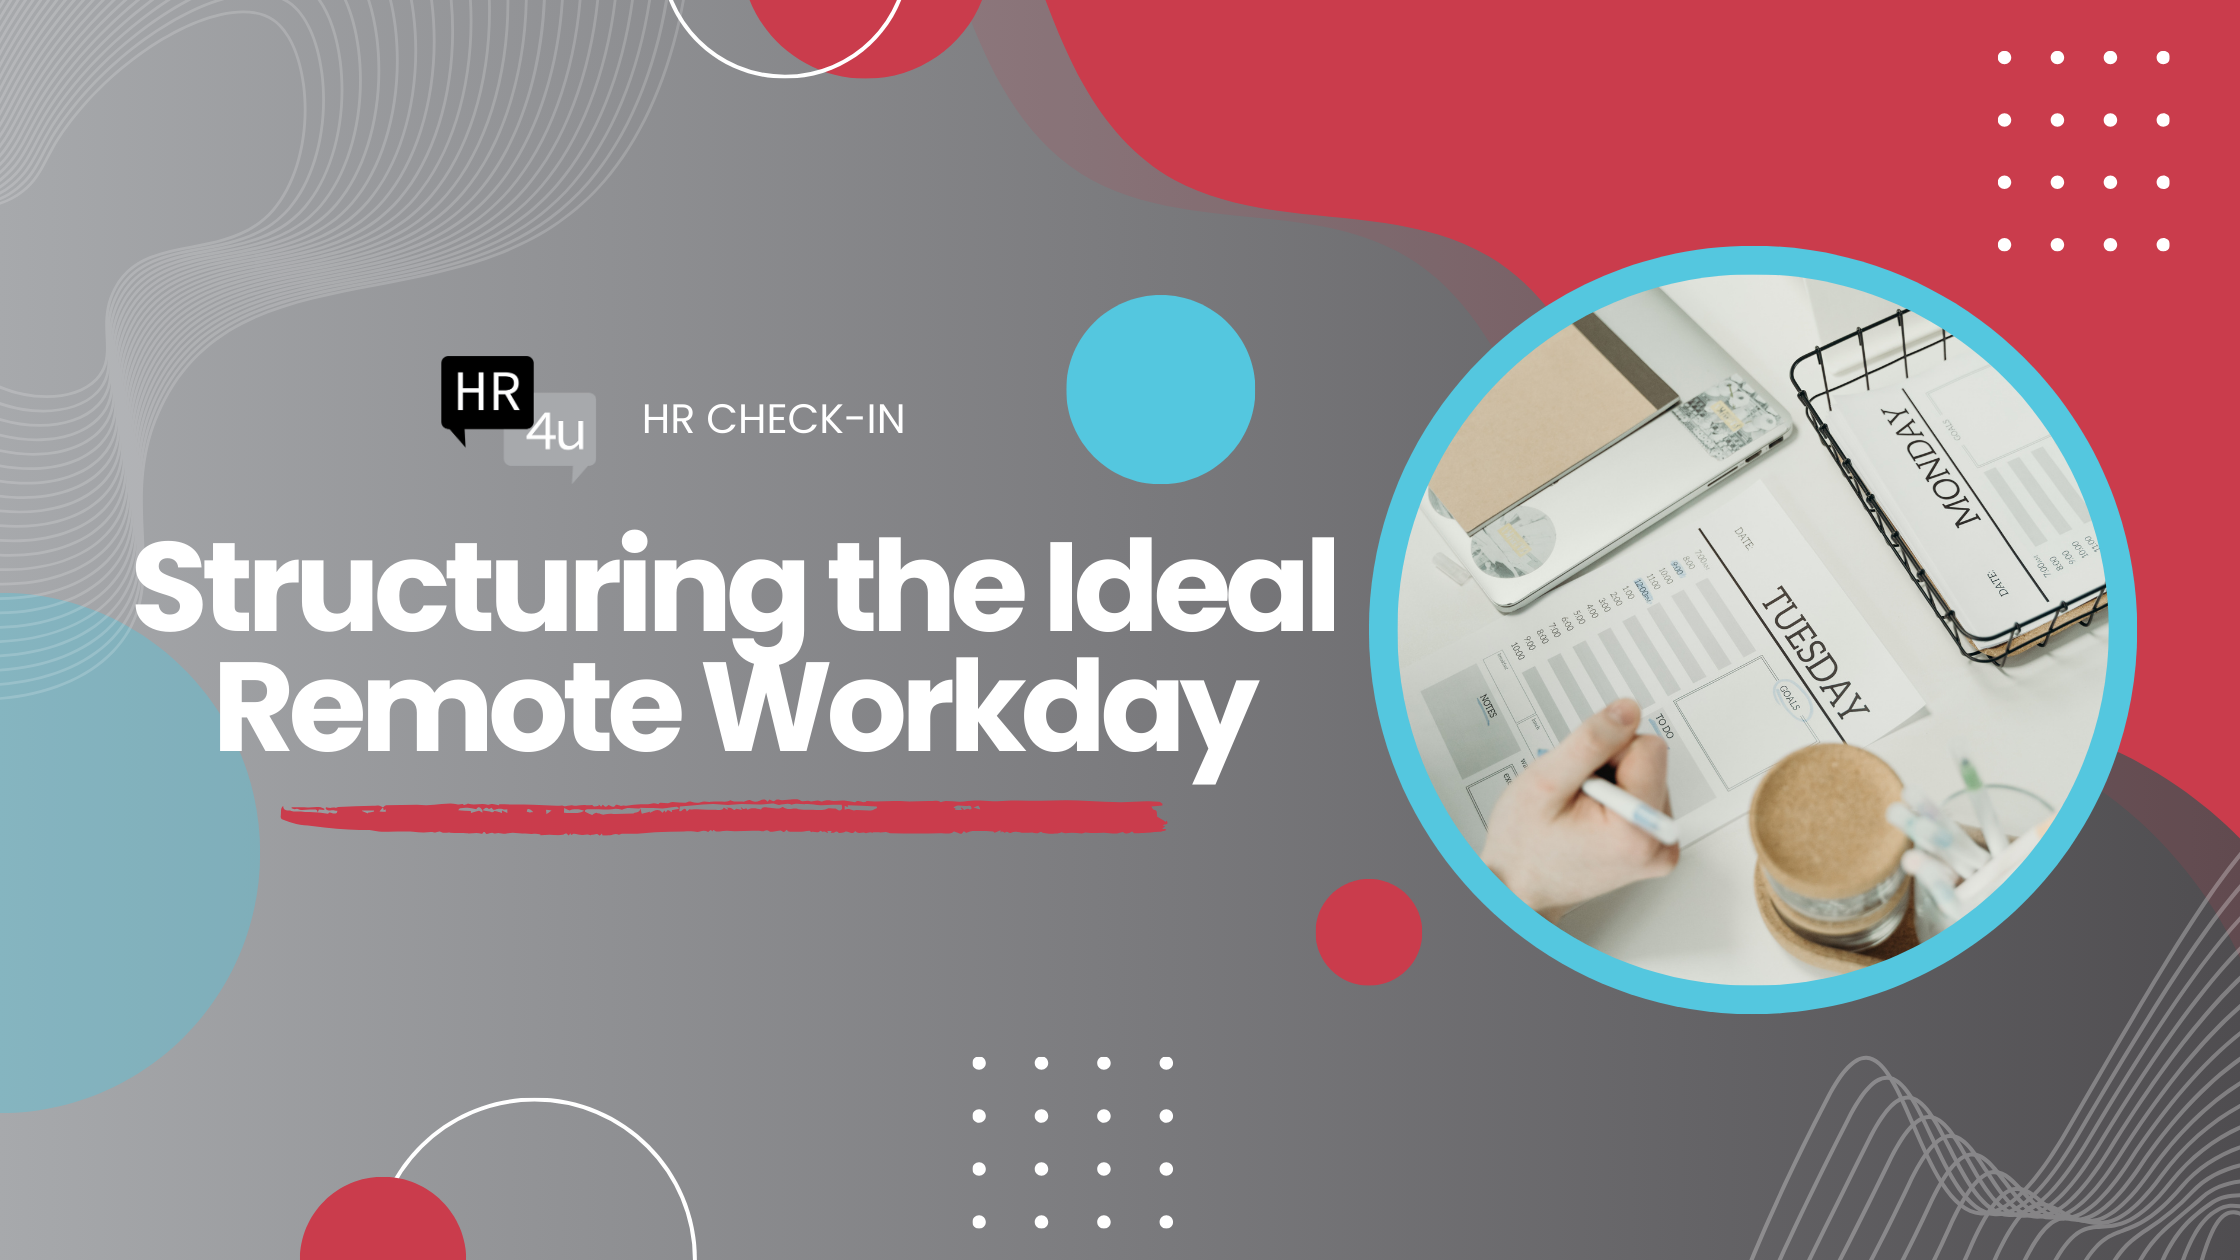 Structuring the Ideal Remote Workday